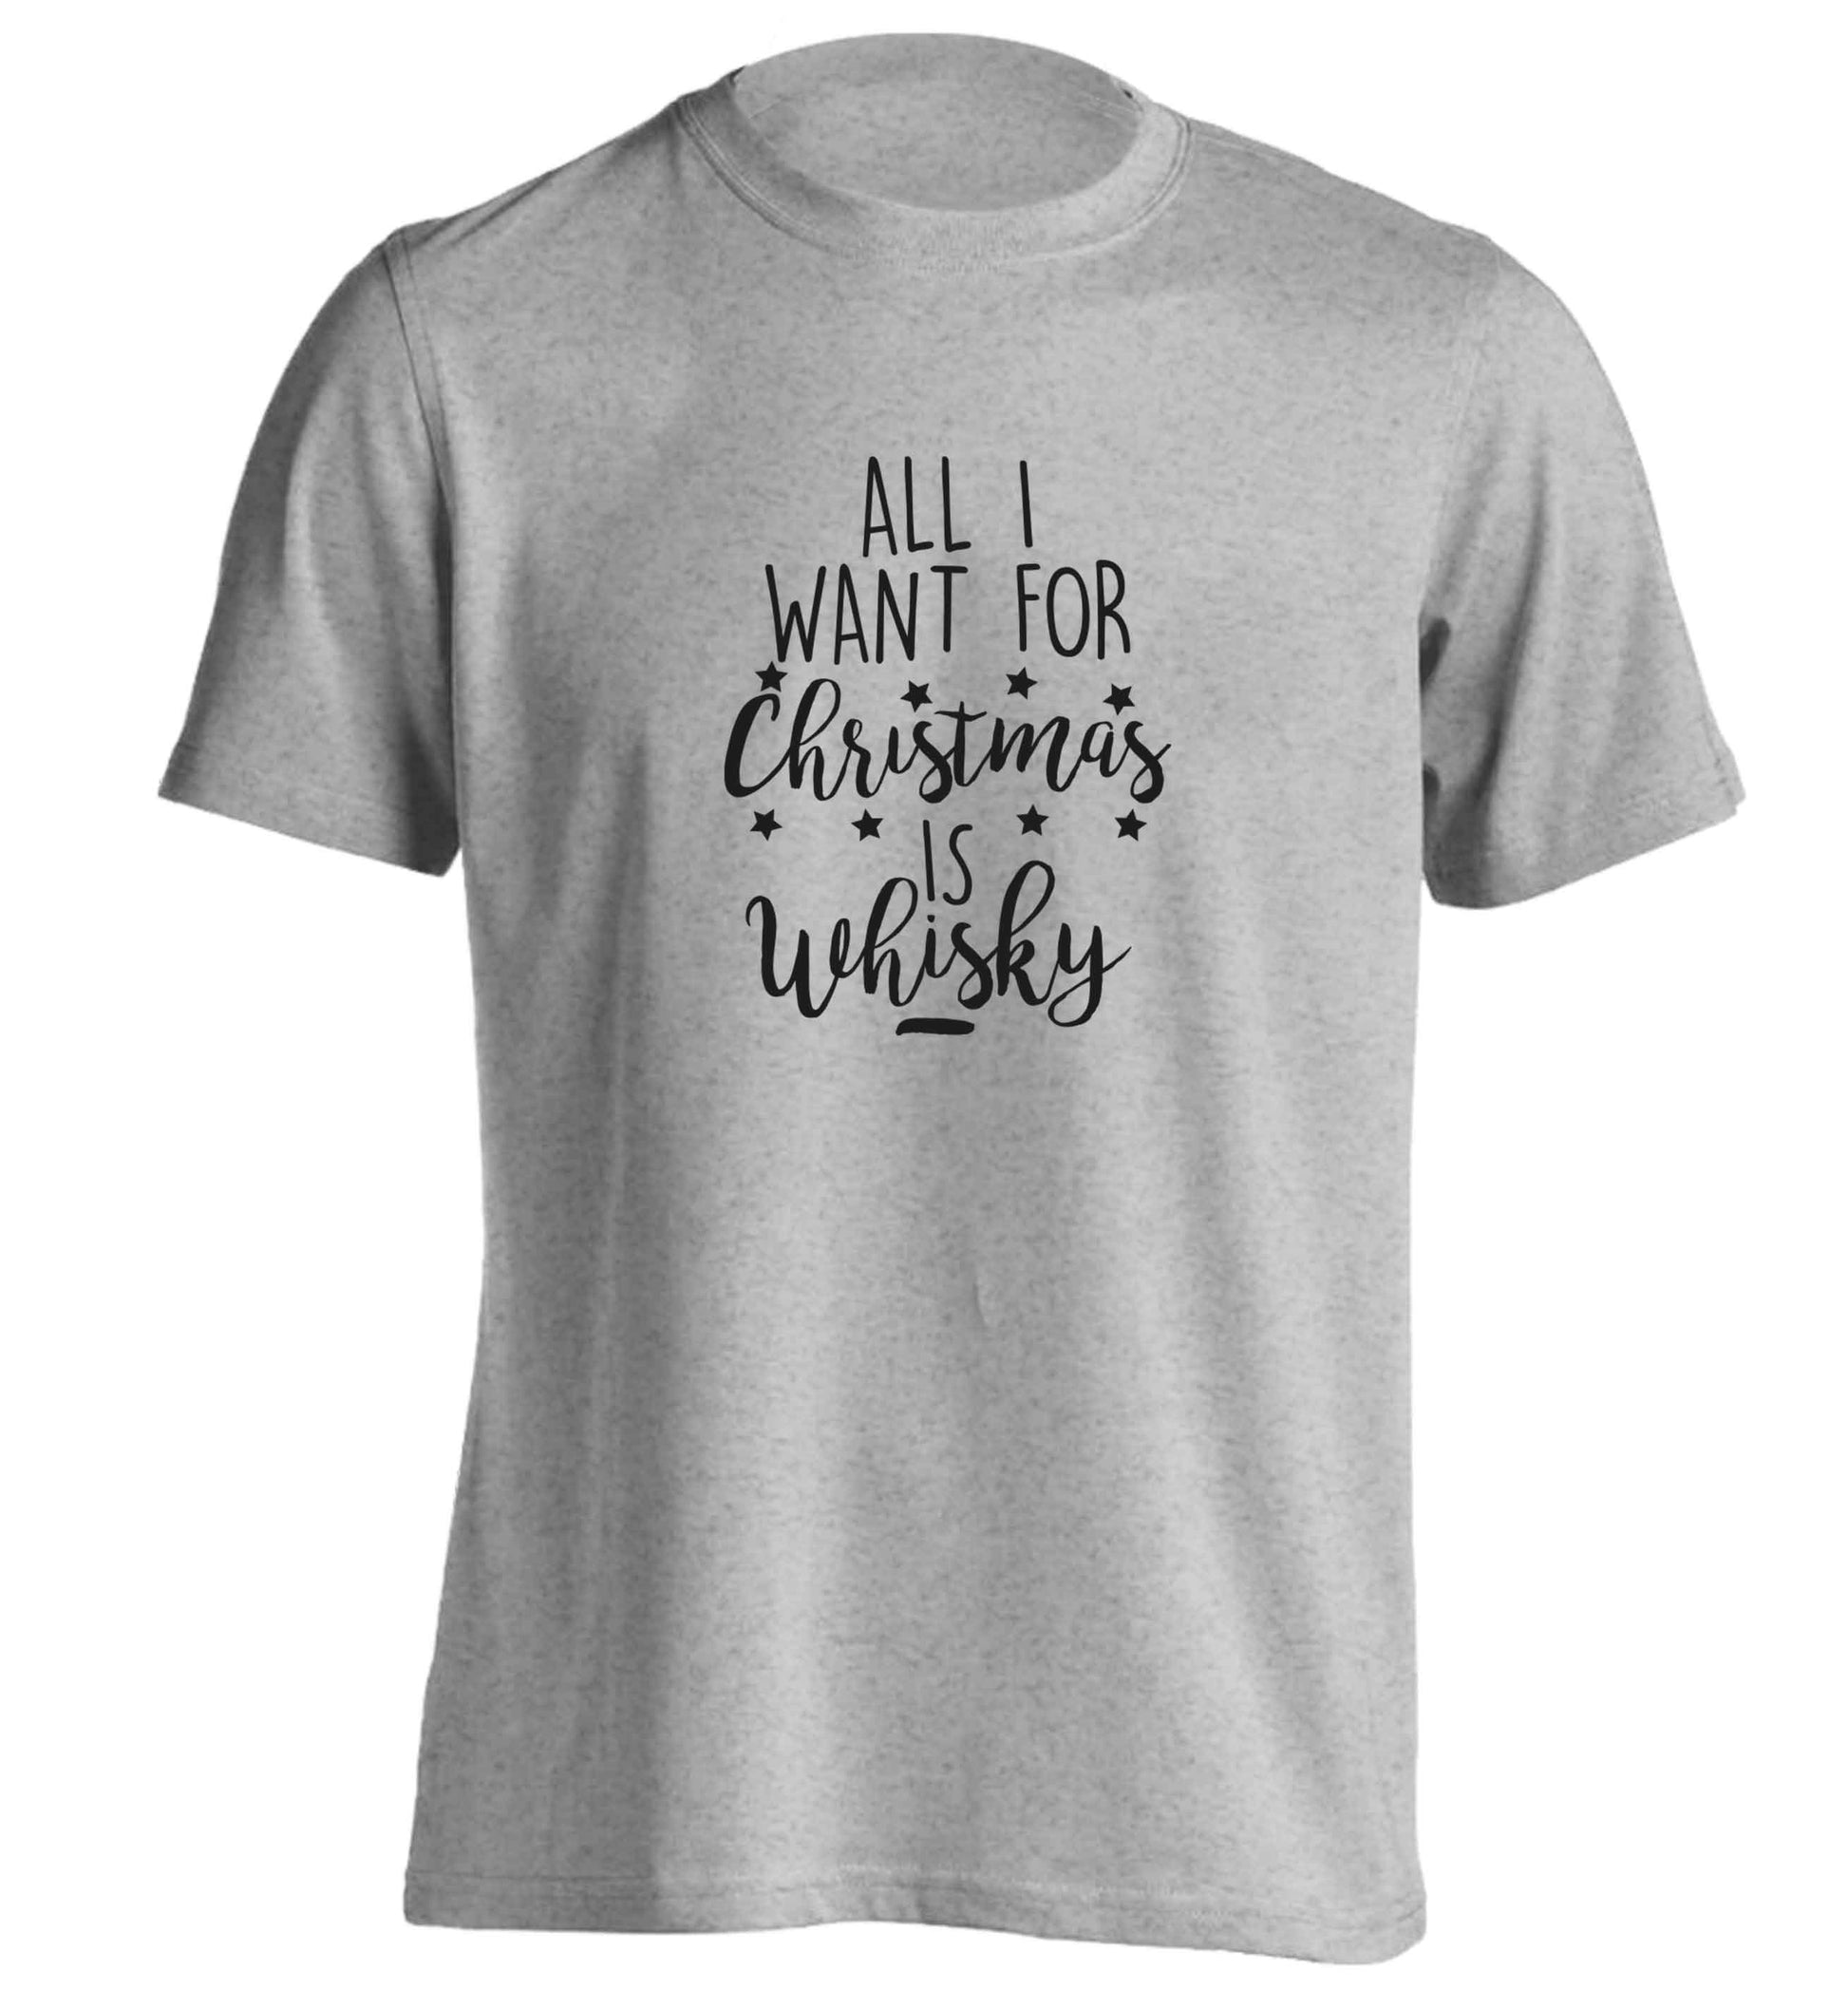 All I want for Christmas is whisky adults unisex grey Tshirt 2XL